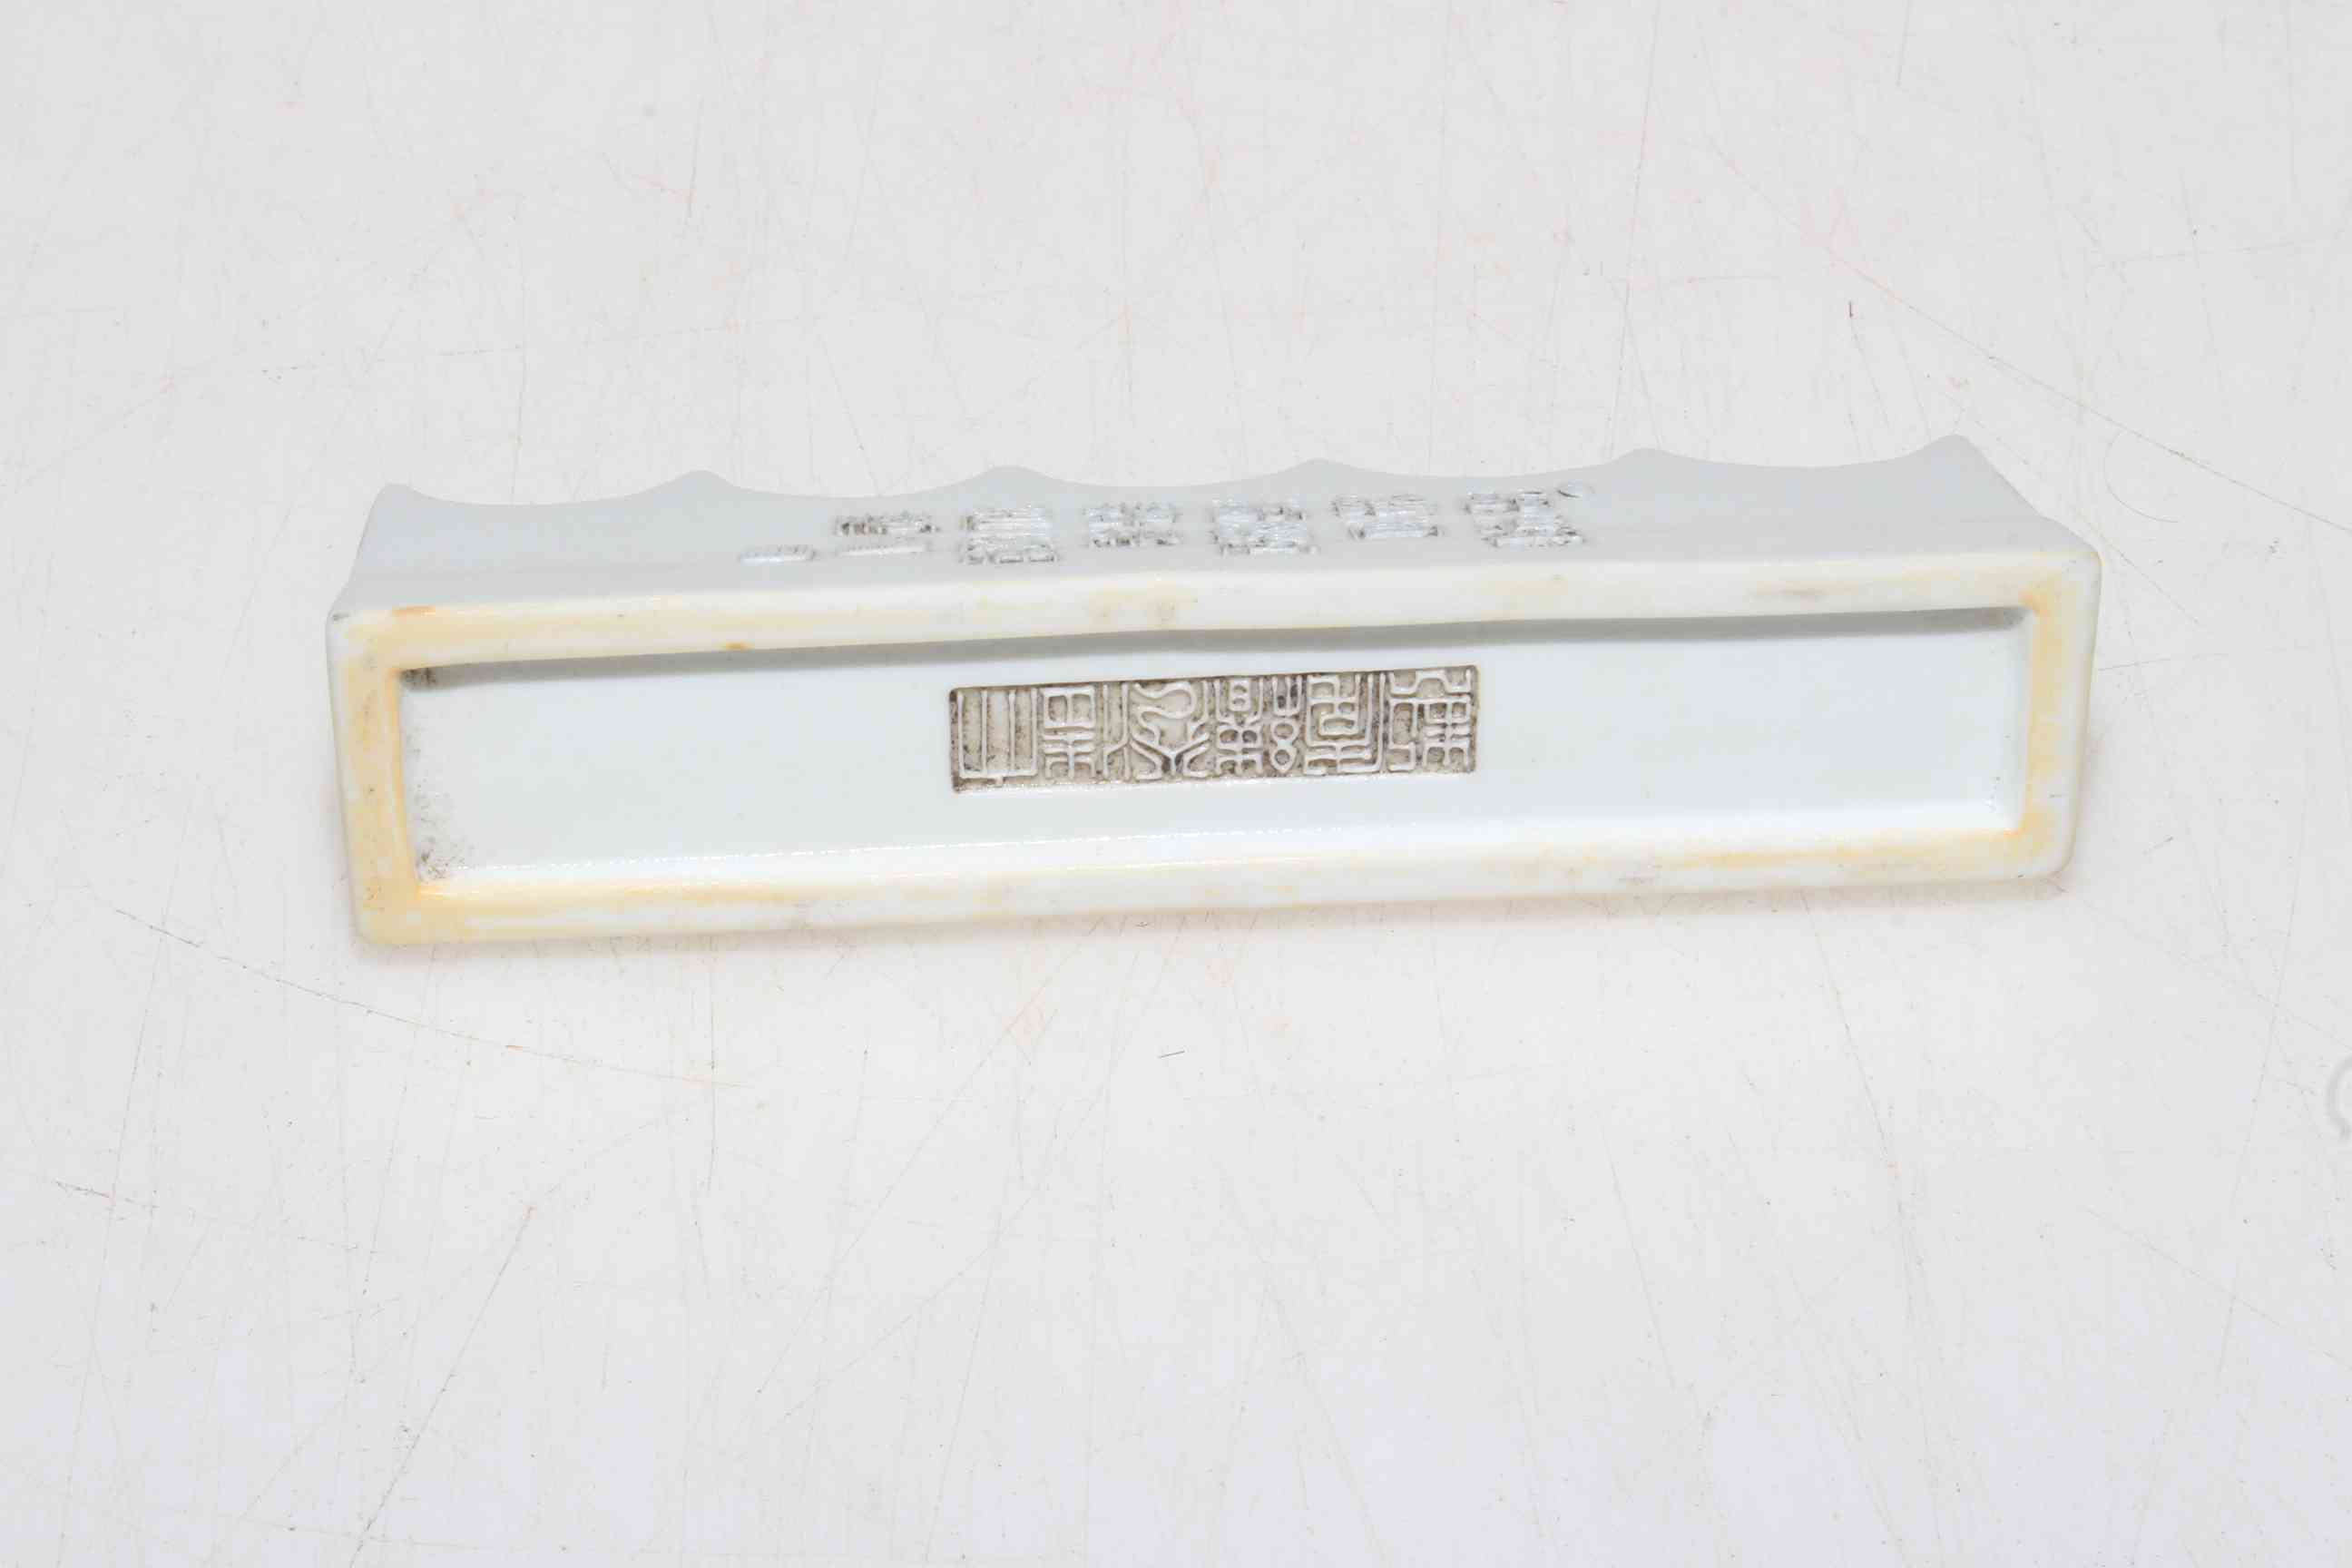 Chinese bisque pen stand with relief landscape and calligraphy, 11cm across. - Image 3 of 3